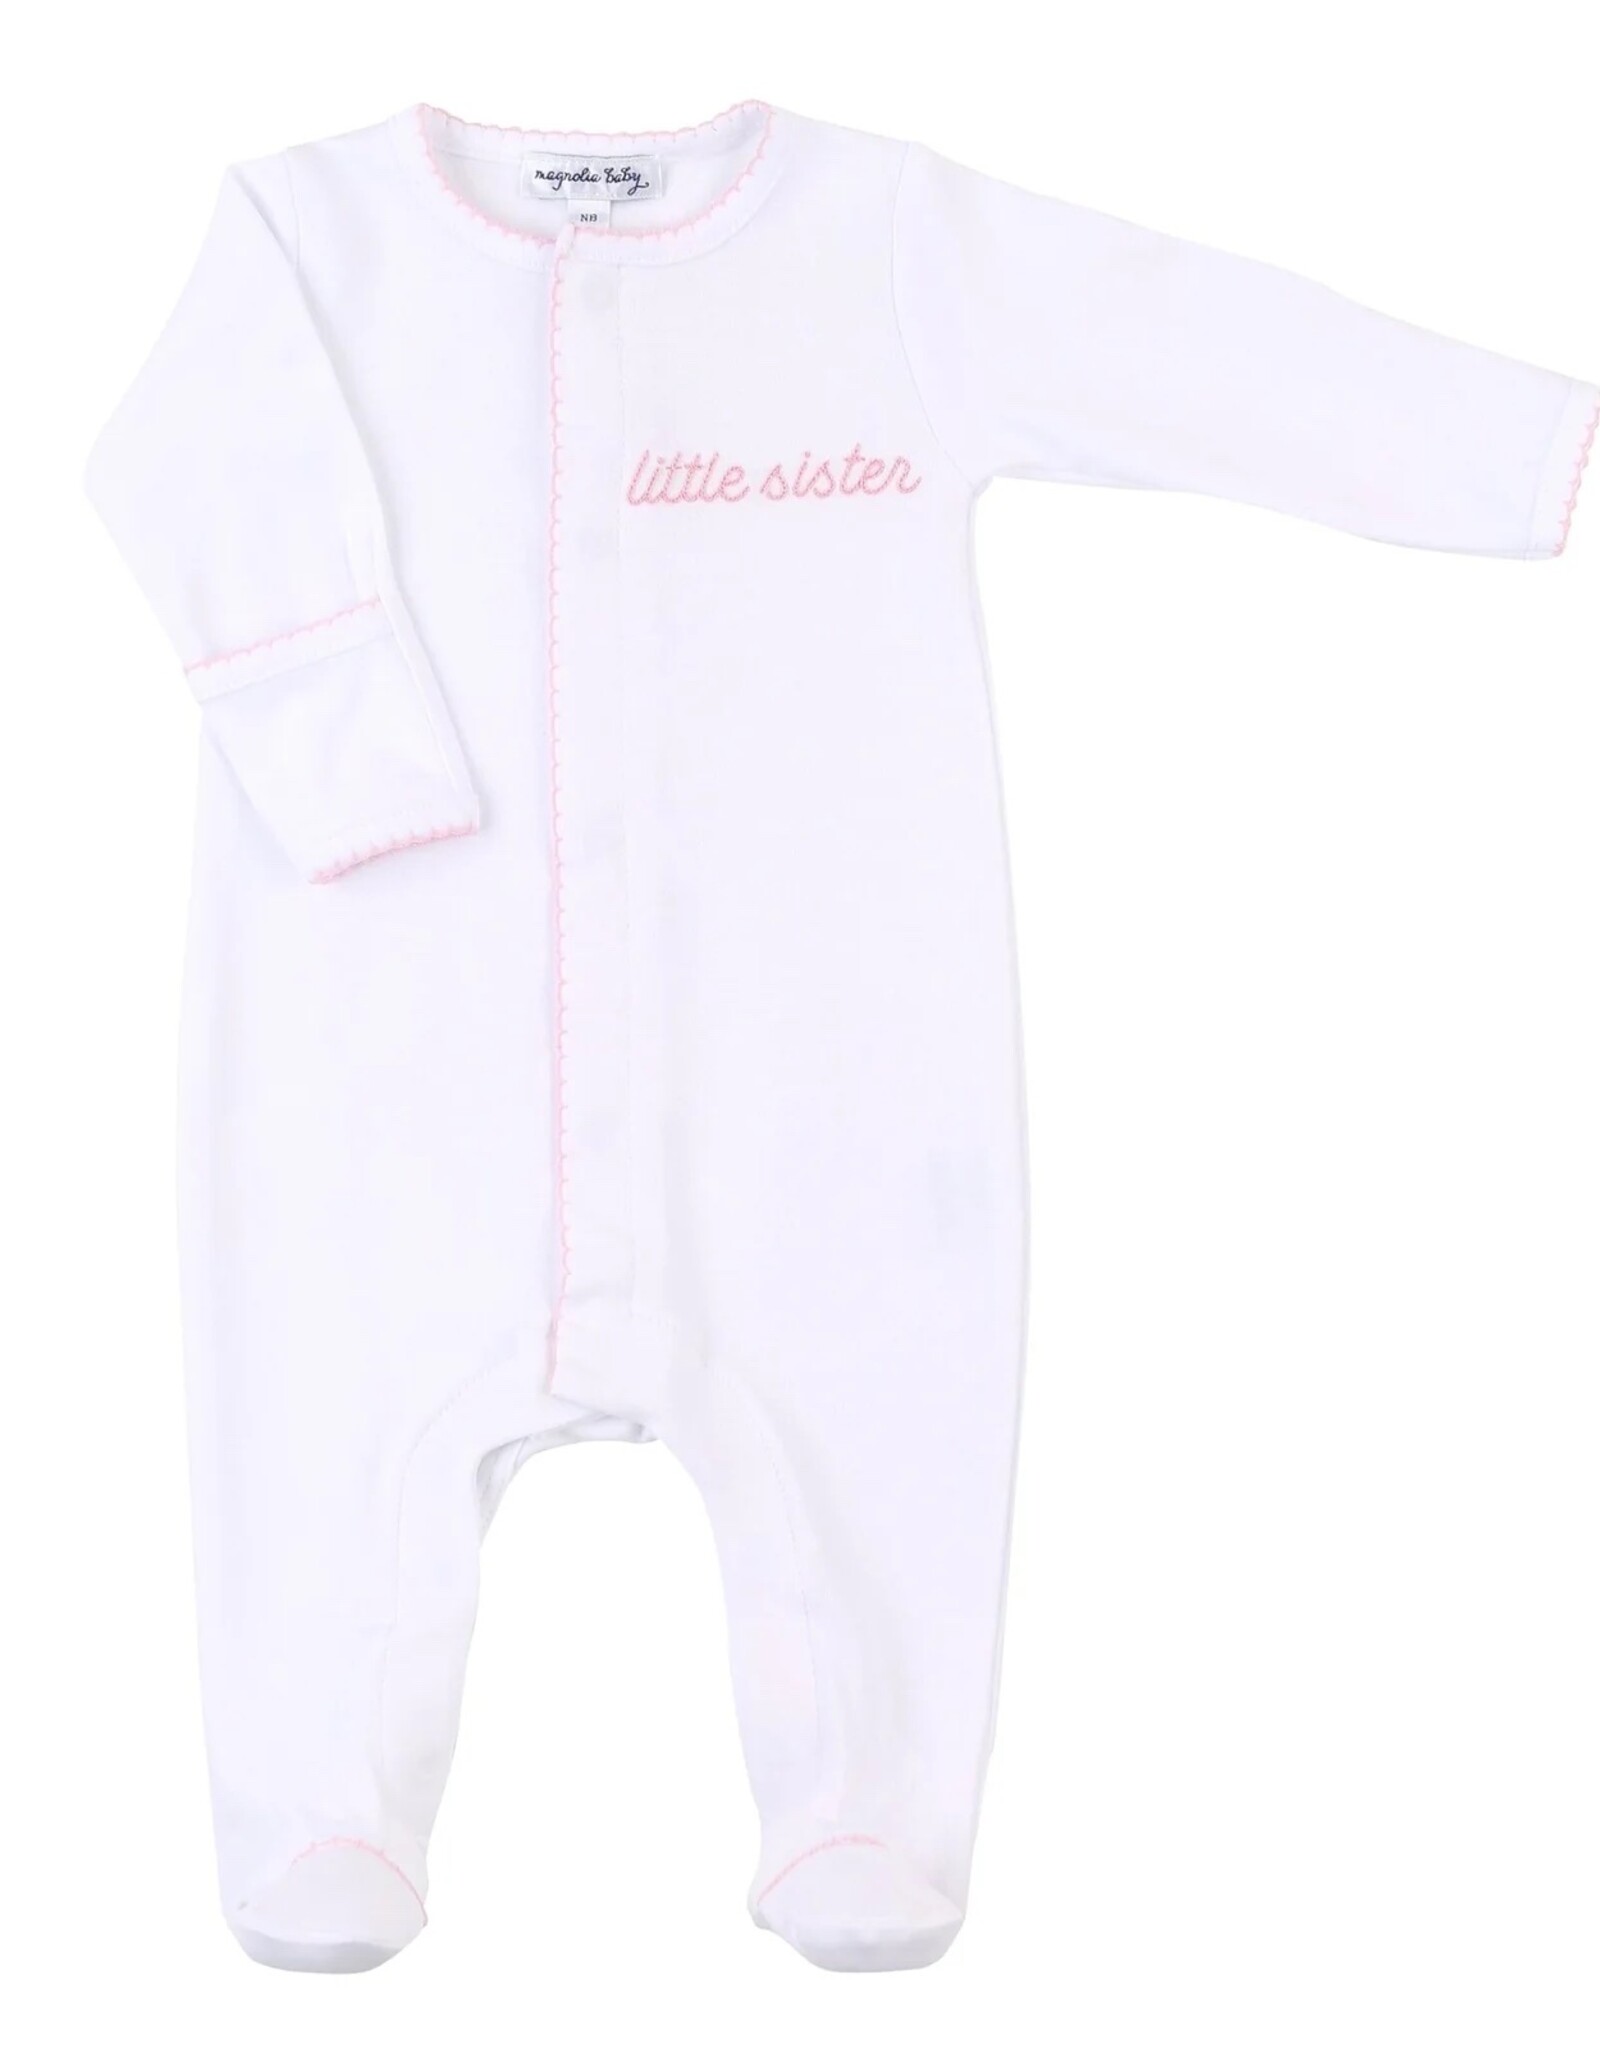 Magnolia Baby White Little Sister Pink Embroidered Footie